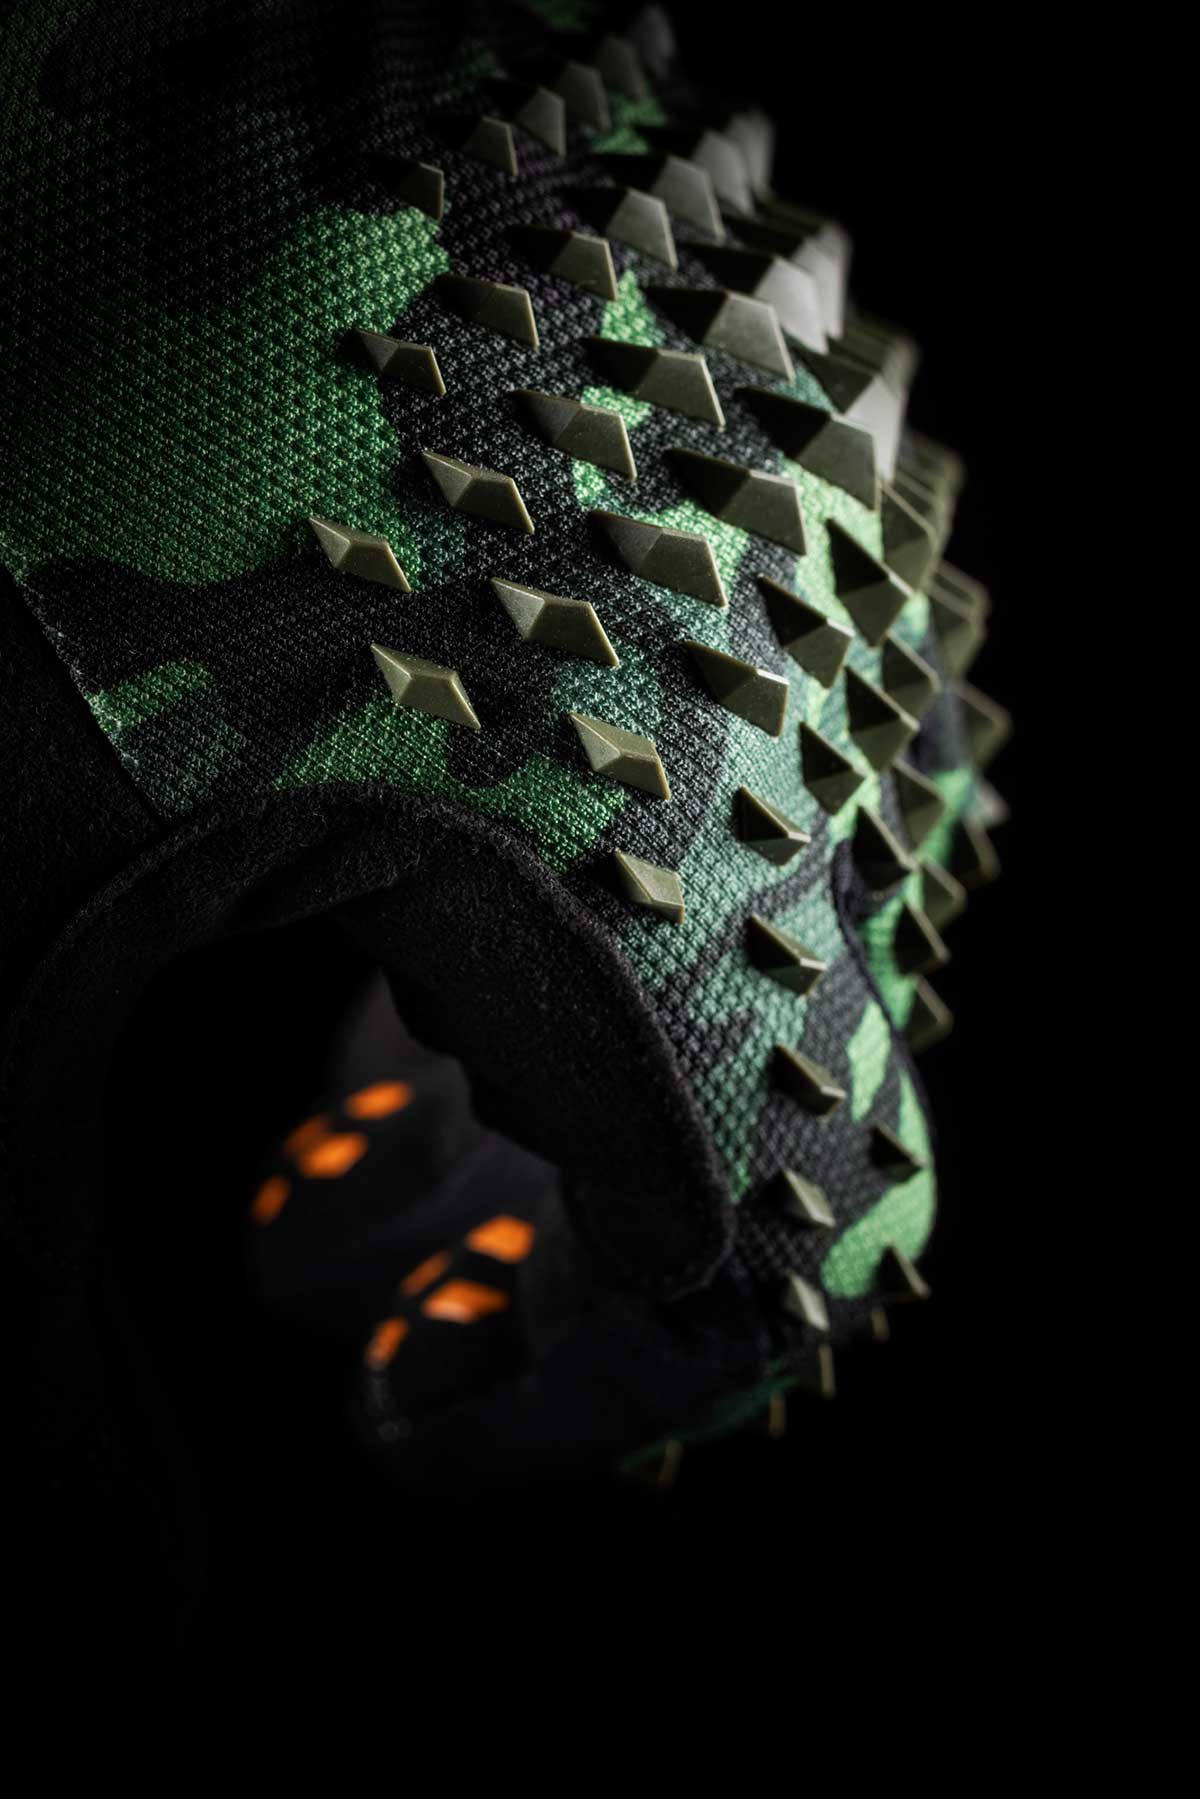 bluegrass prizma 3d impact protection mtb gloves green forehand detail spiky rubber prisms